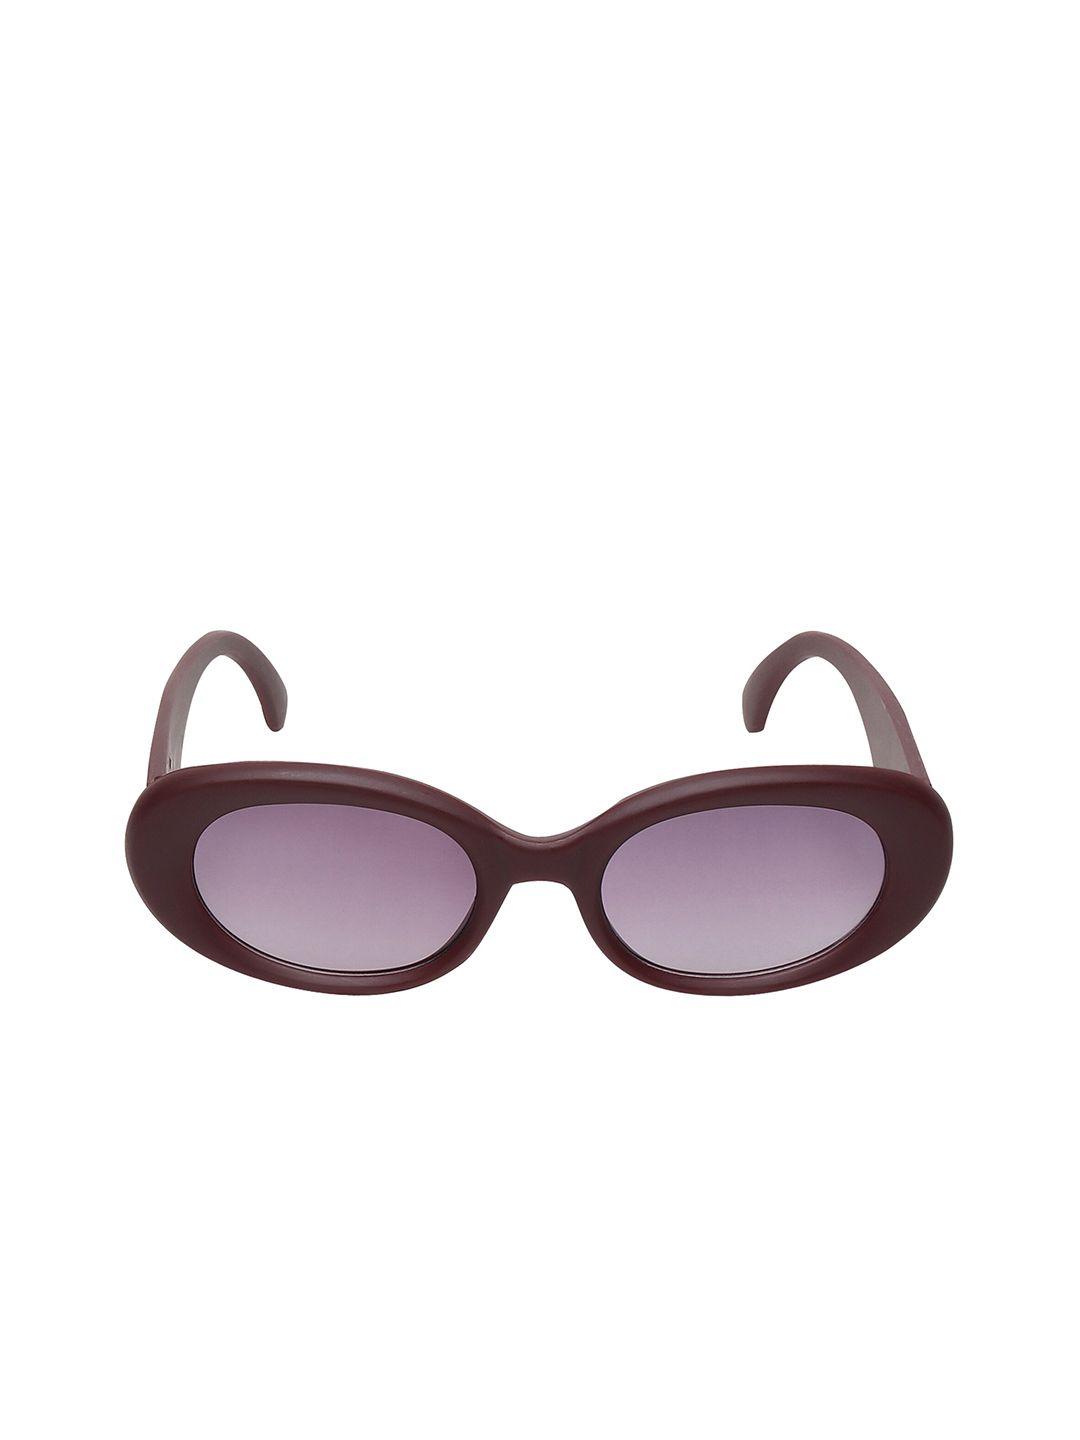 swiss-design-unisex-purple-lens-&-brown-oval-sunglasses-with-uv-protected-lens